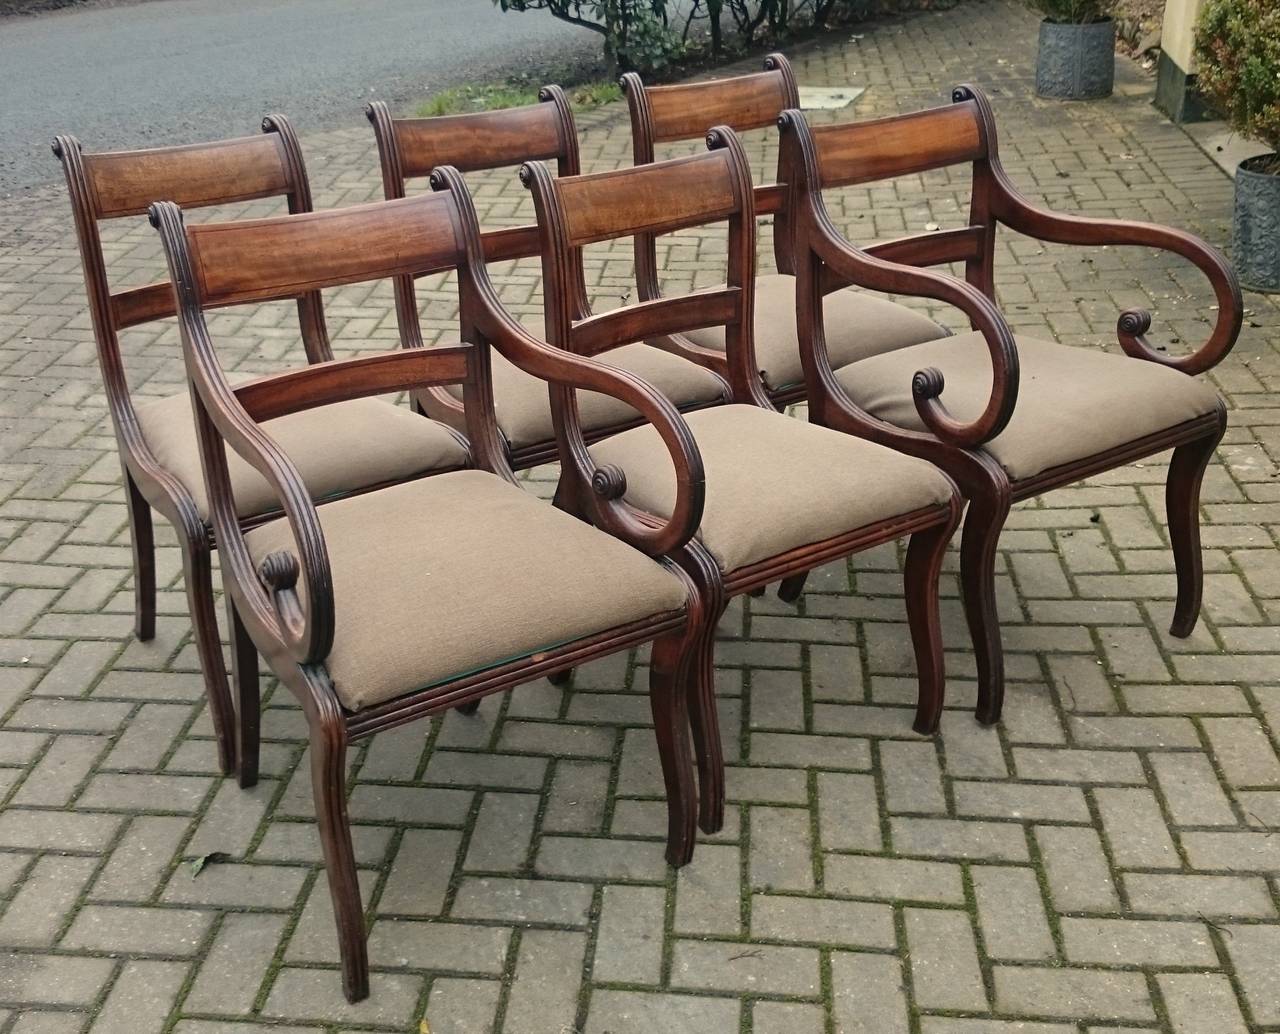 Really exceptional quality set of six antique dining chairs made of solid Cuban mahogany. They are an unusually generous shape with flowing lines from the back rail to the front leg which mean that there are almost no straight lines on the whole